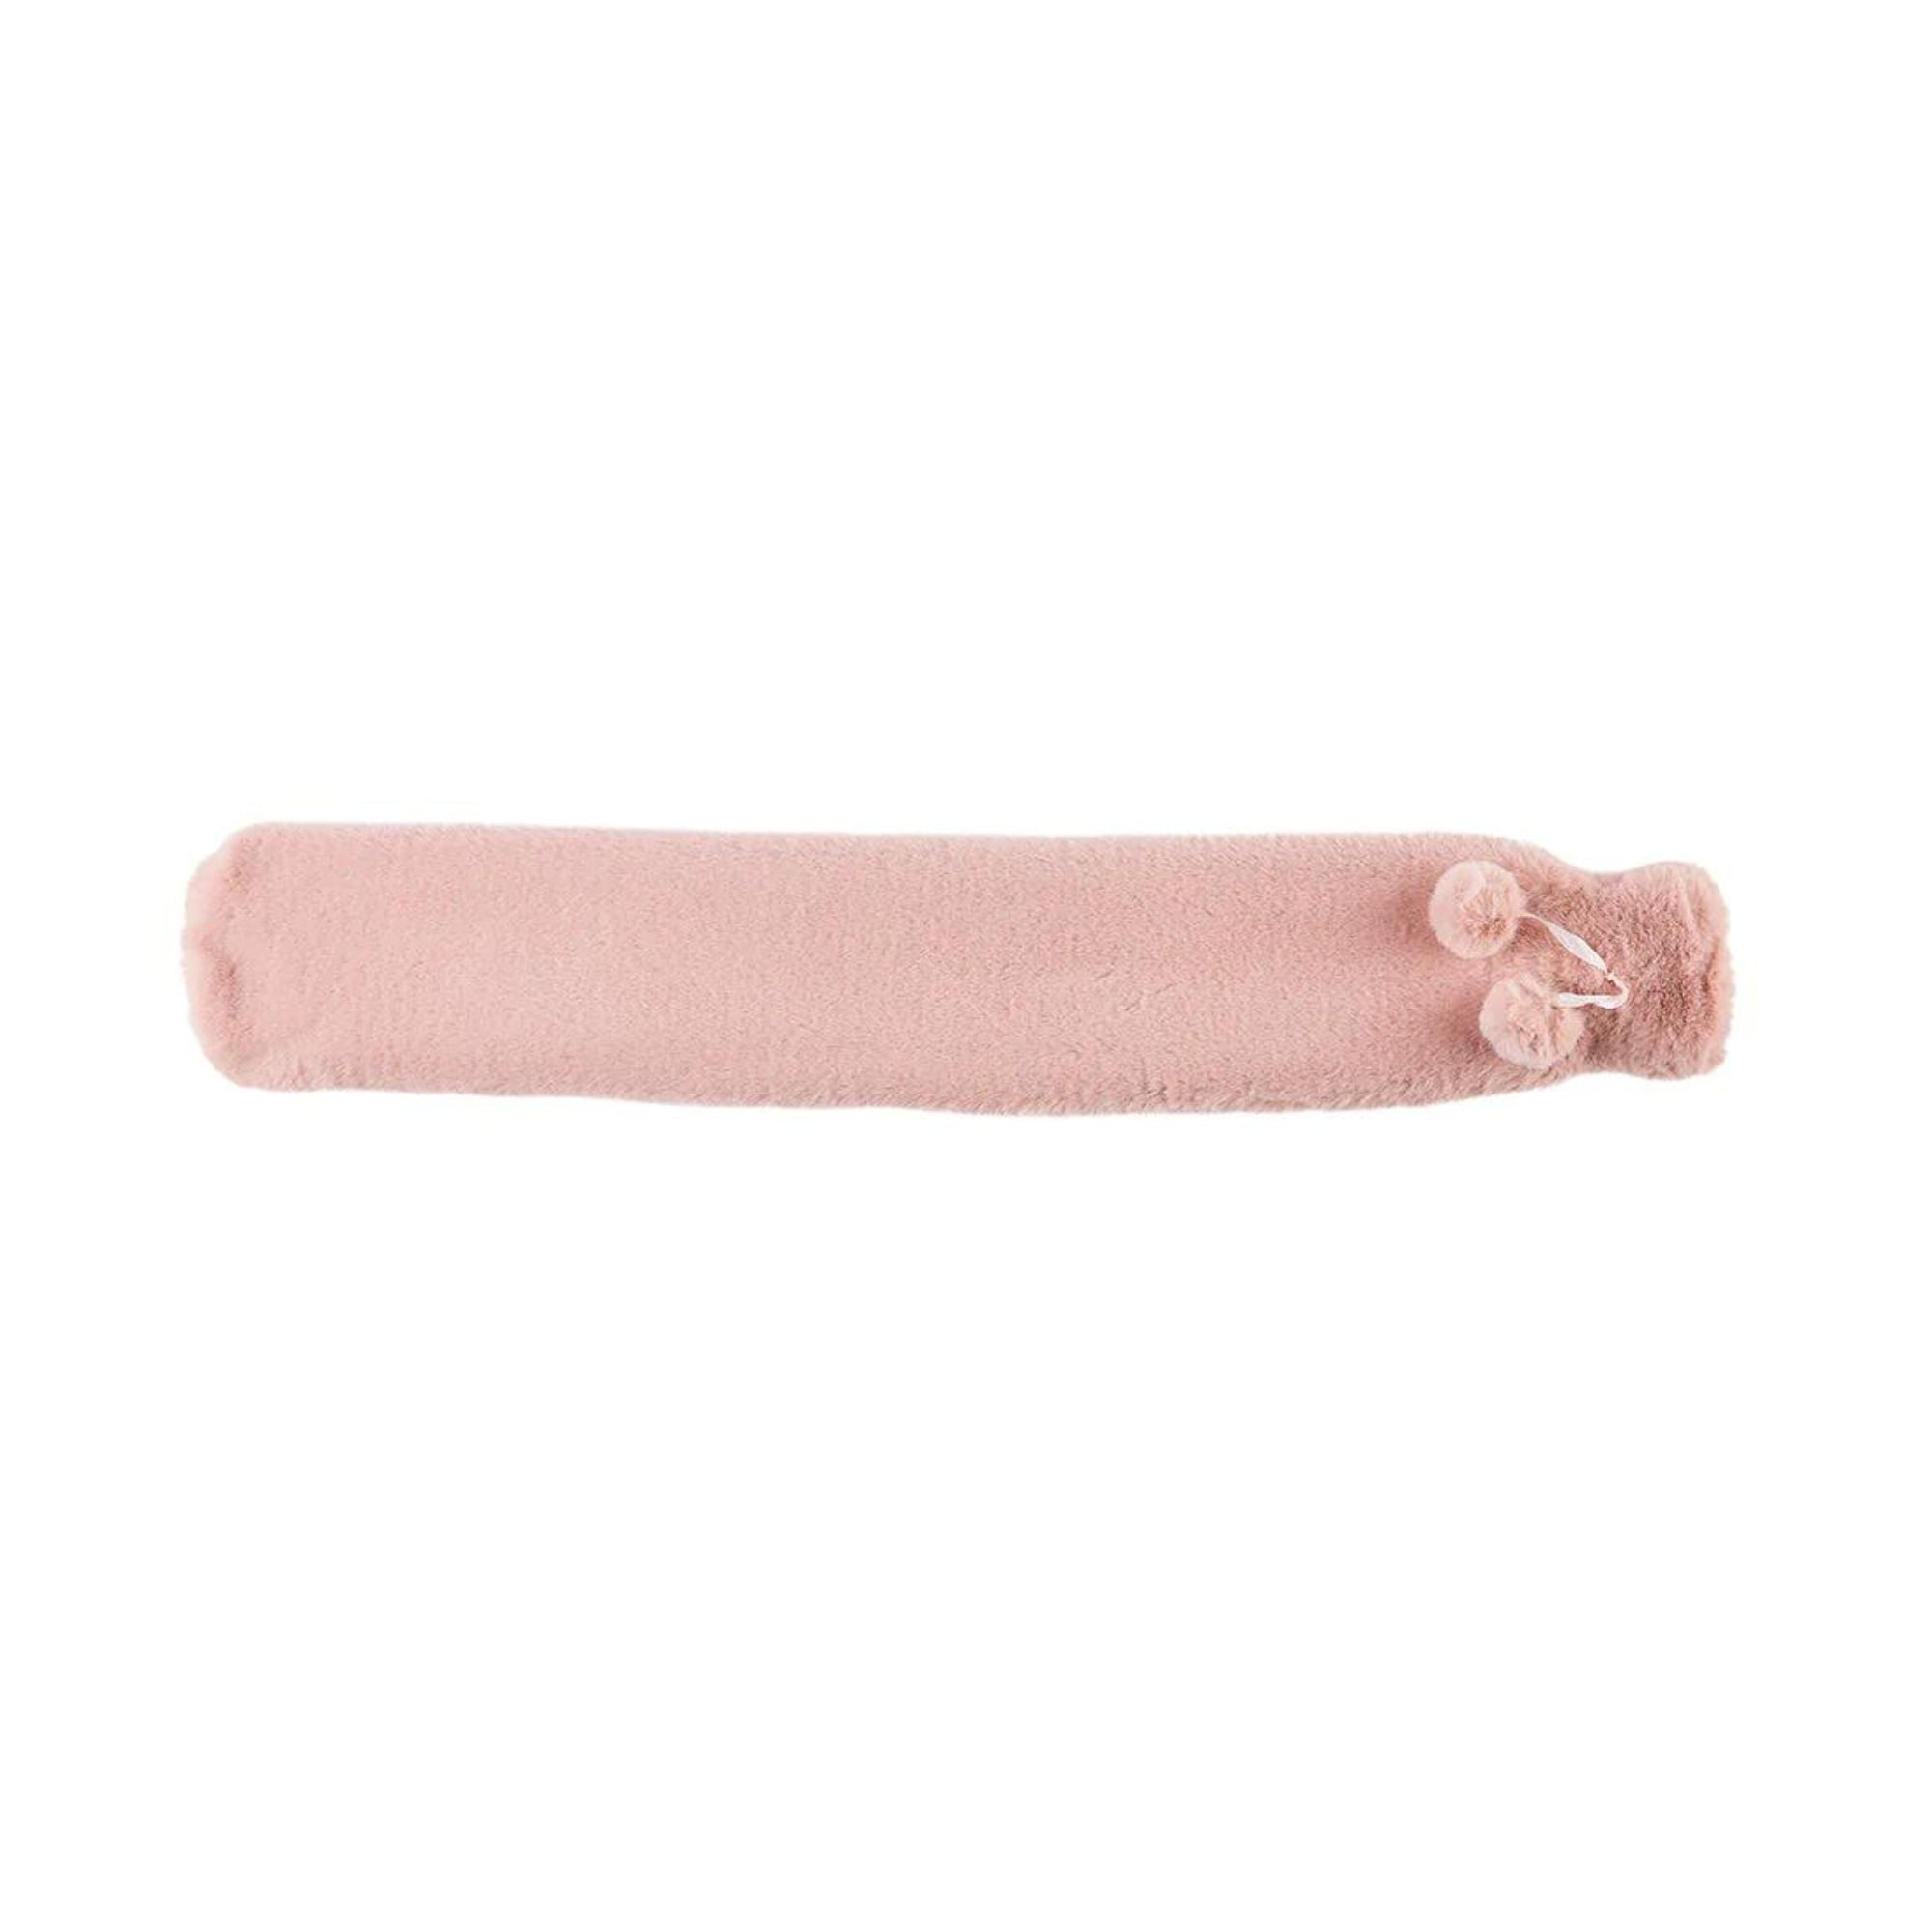 2 Litre Long Hot Water Bottle with Blush Pink Faux Fur Cover